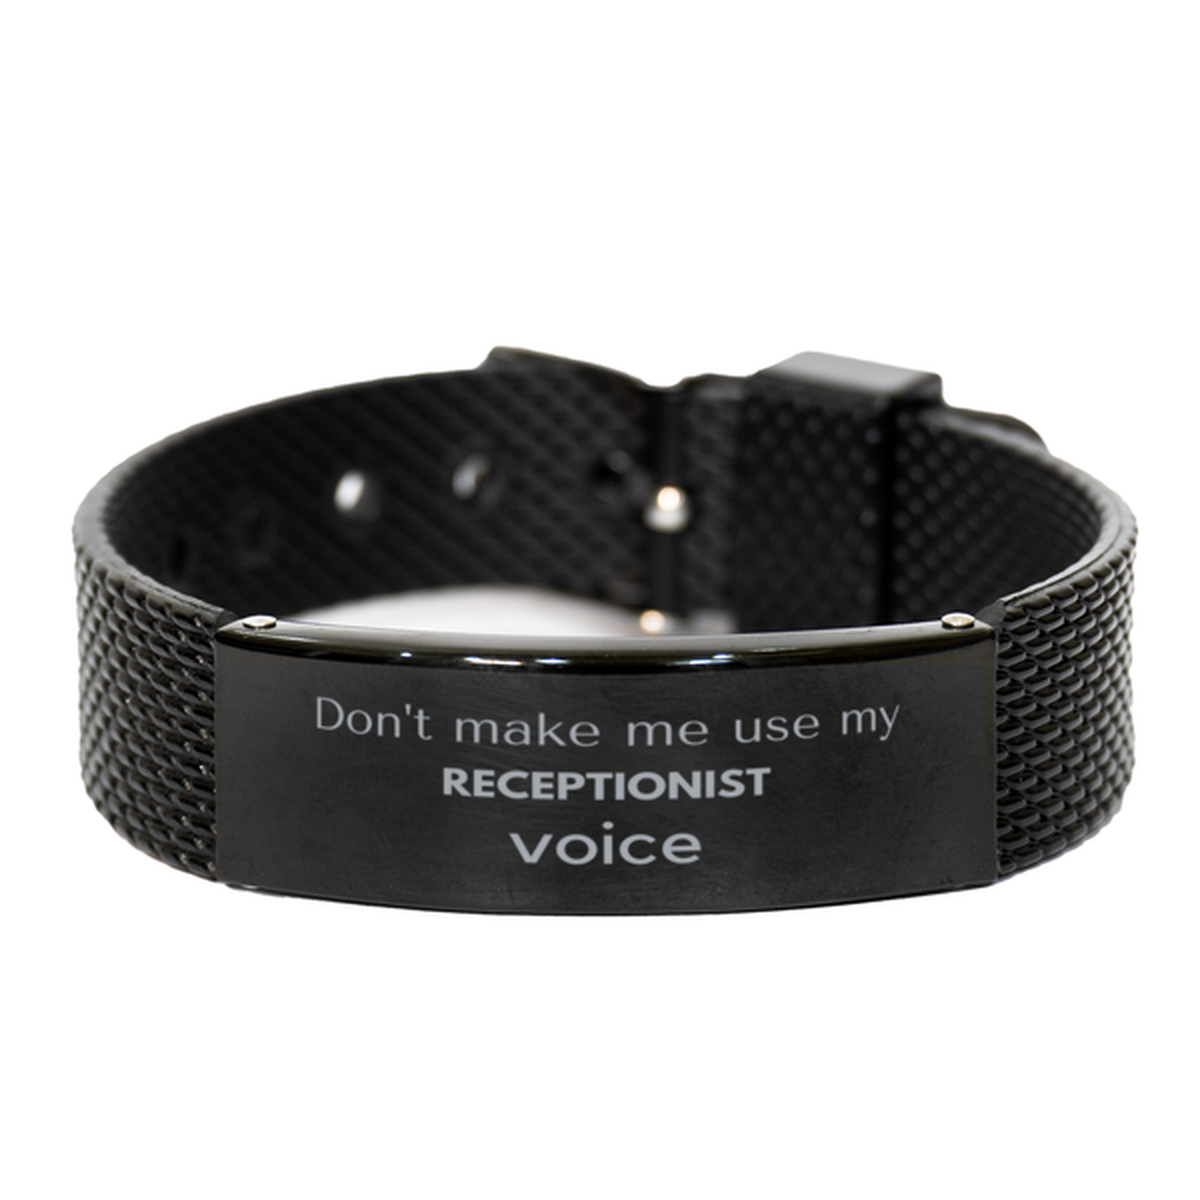 Don't make me use my Receptionist voice, Sarcasm Receptionist Gifts, Christmas Receptionist Black Shark Mesh Bracelet Birthday Unique Gifts For Receptionist Coworkers, Men, Women, Colleague, Friends